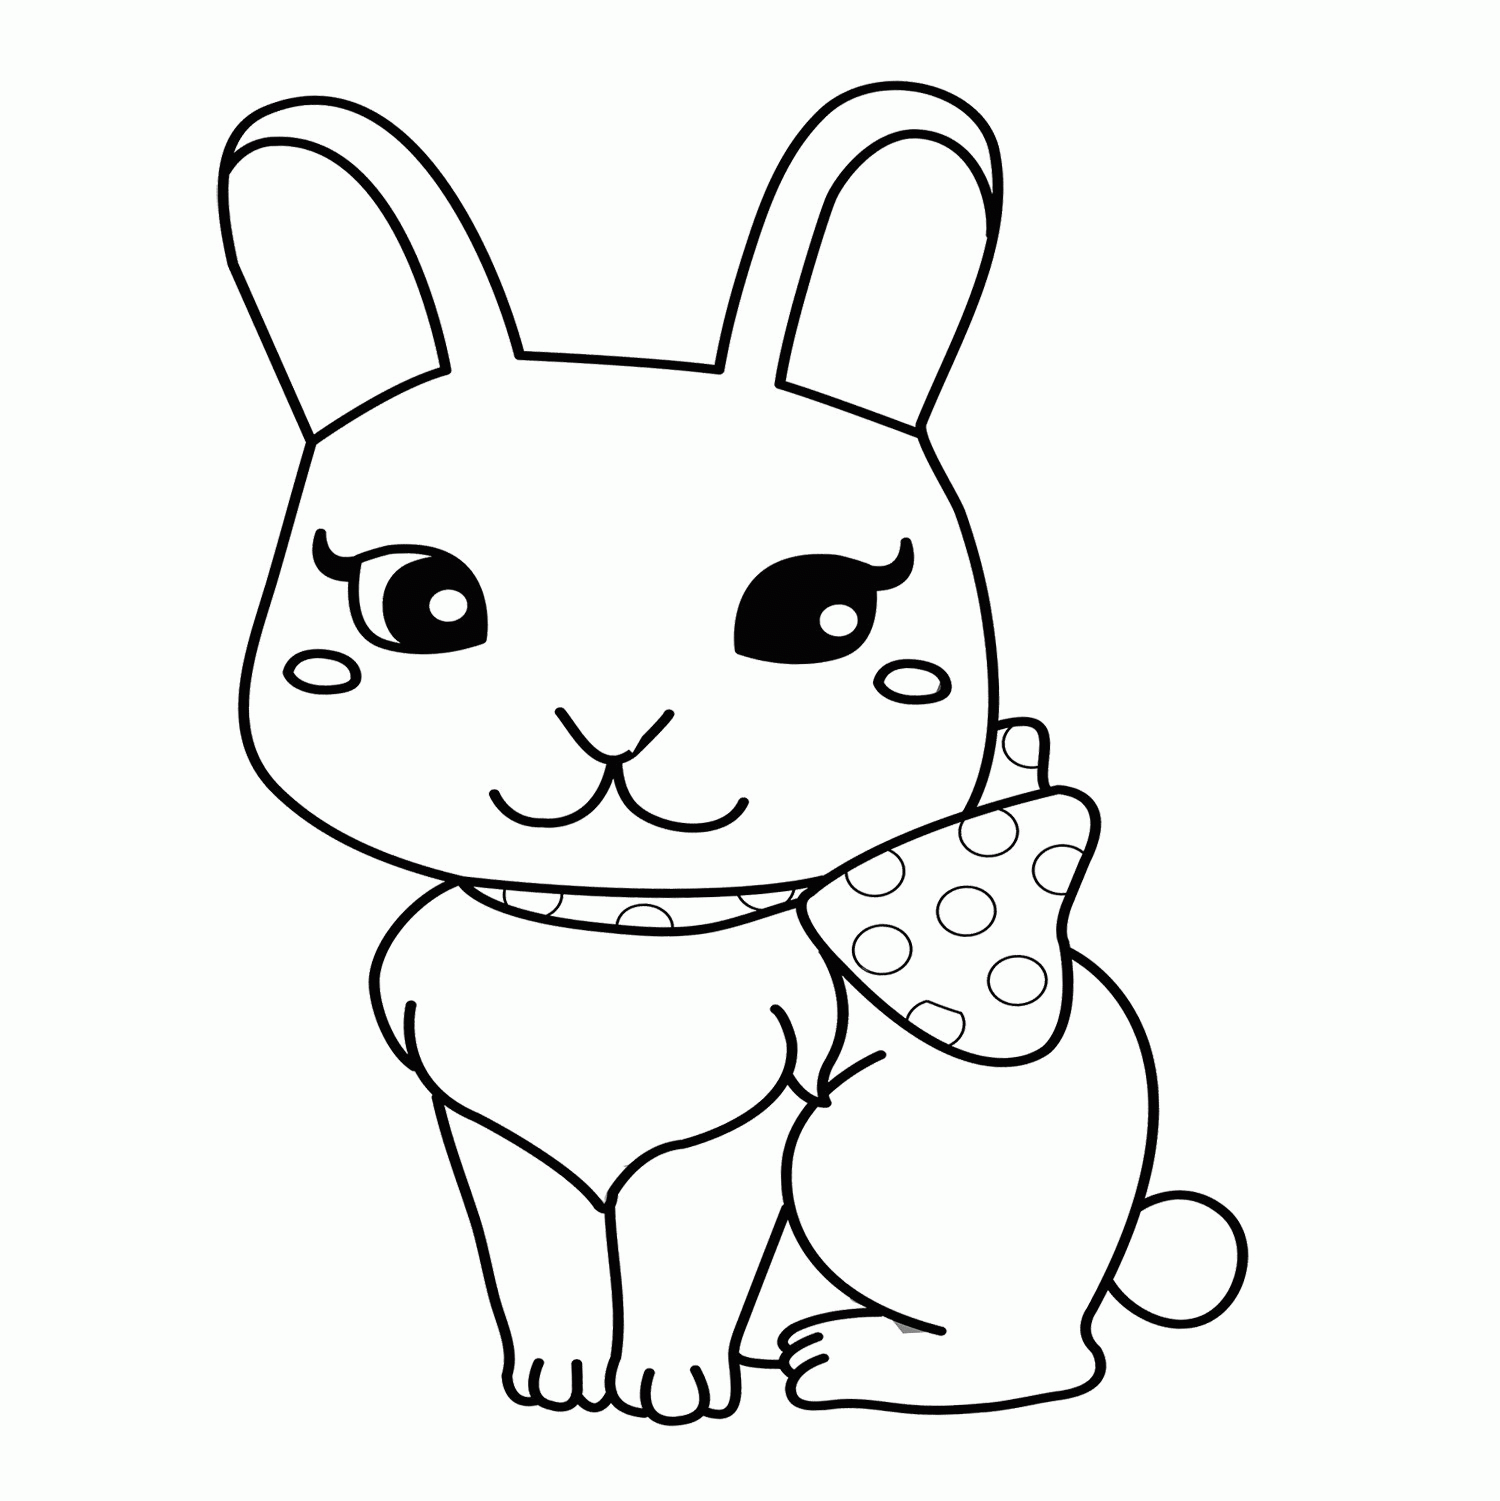 Cute easy coloring pages for girls 20.jpg   Coloring Home